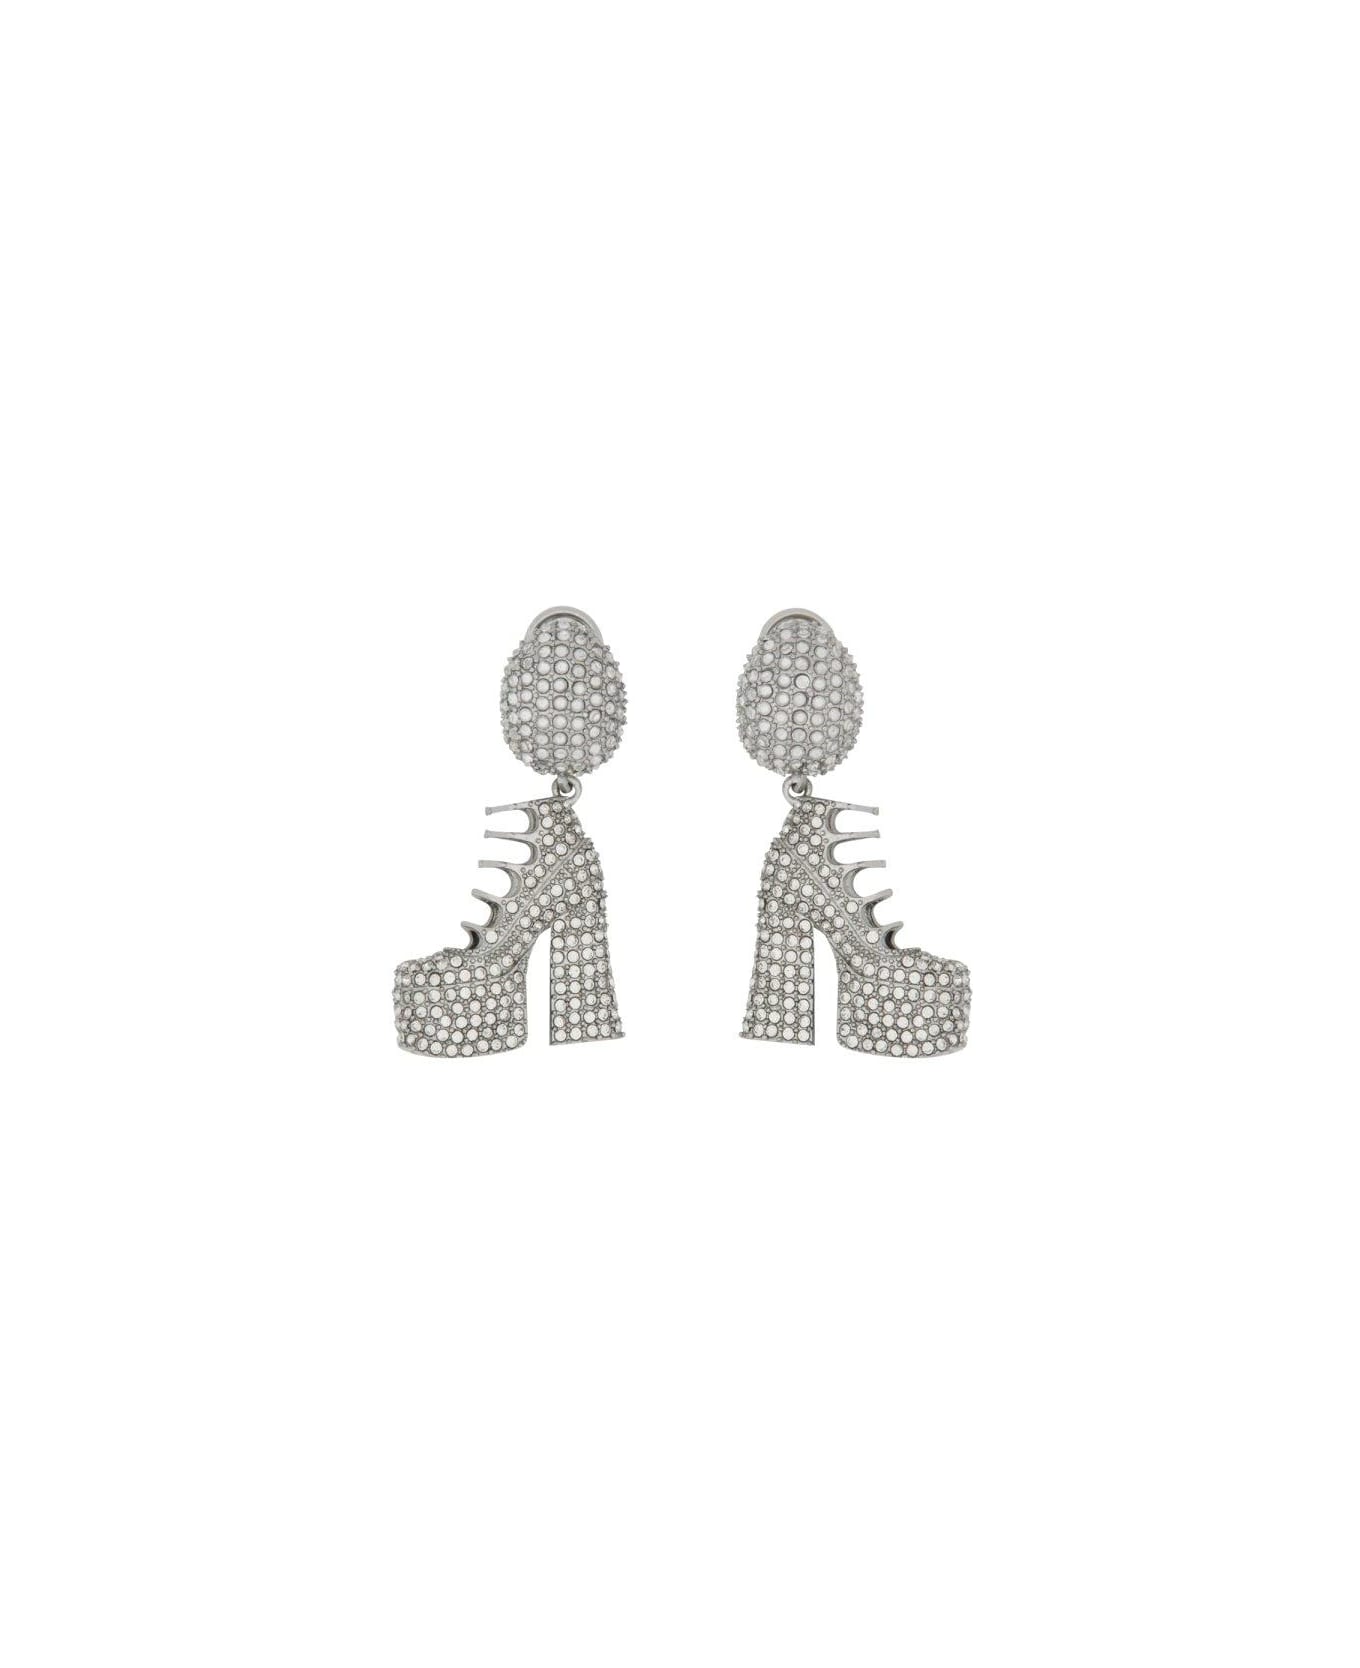 Marc Jacobs The Pave Kiki Boot Earrings - ARGENTO